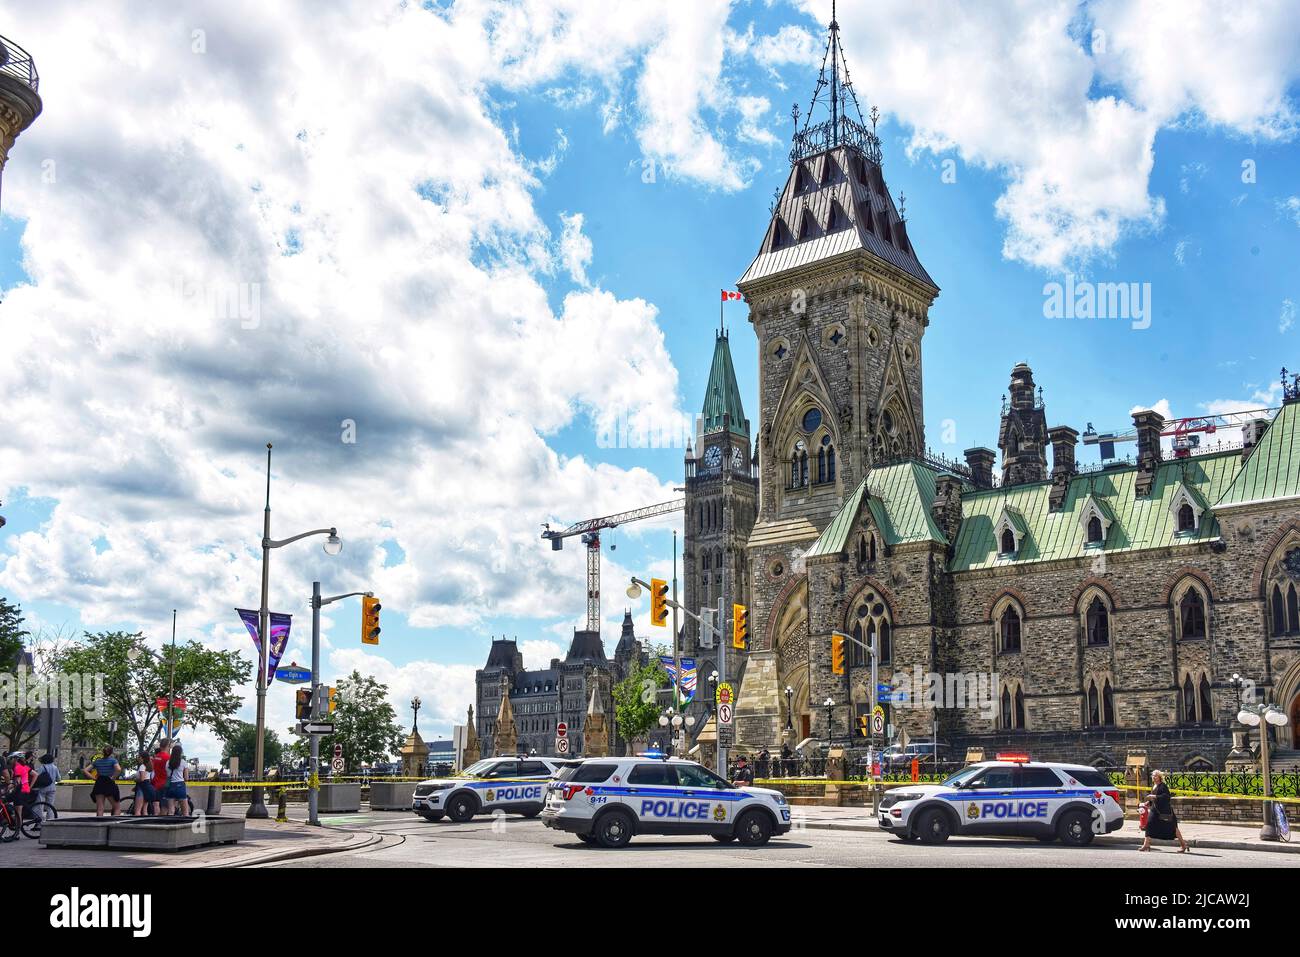 Ottawa, Canada - June 11, 2022: Ottawa police block off entrance to Wellington Street and other nearby streets after an evacuation and shelter in place order was placed on Parliament Hill due to an undisclosed possible threat. The order was lifted later in the afternoon. Parliament Hill is a popular tourist attraction. Stock Photo